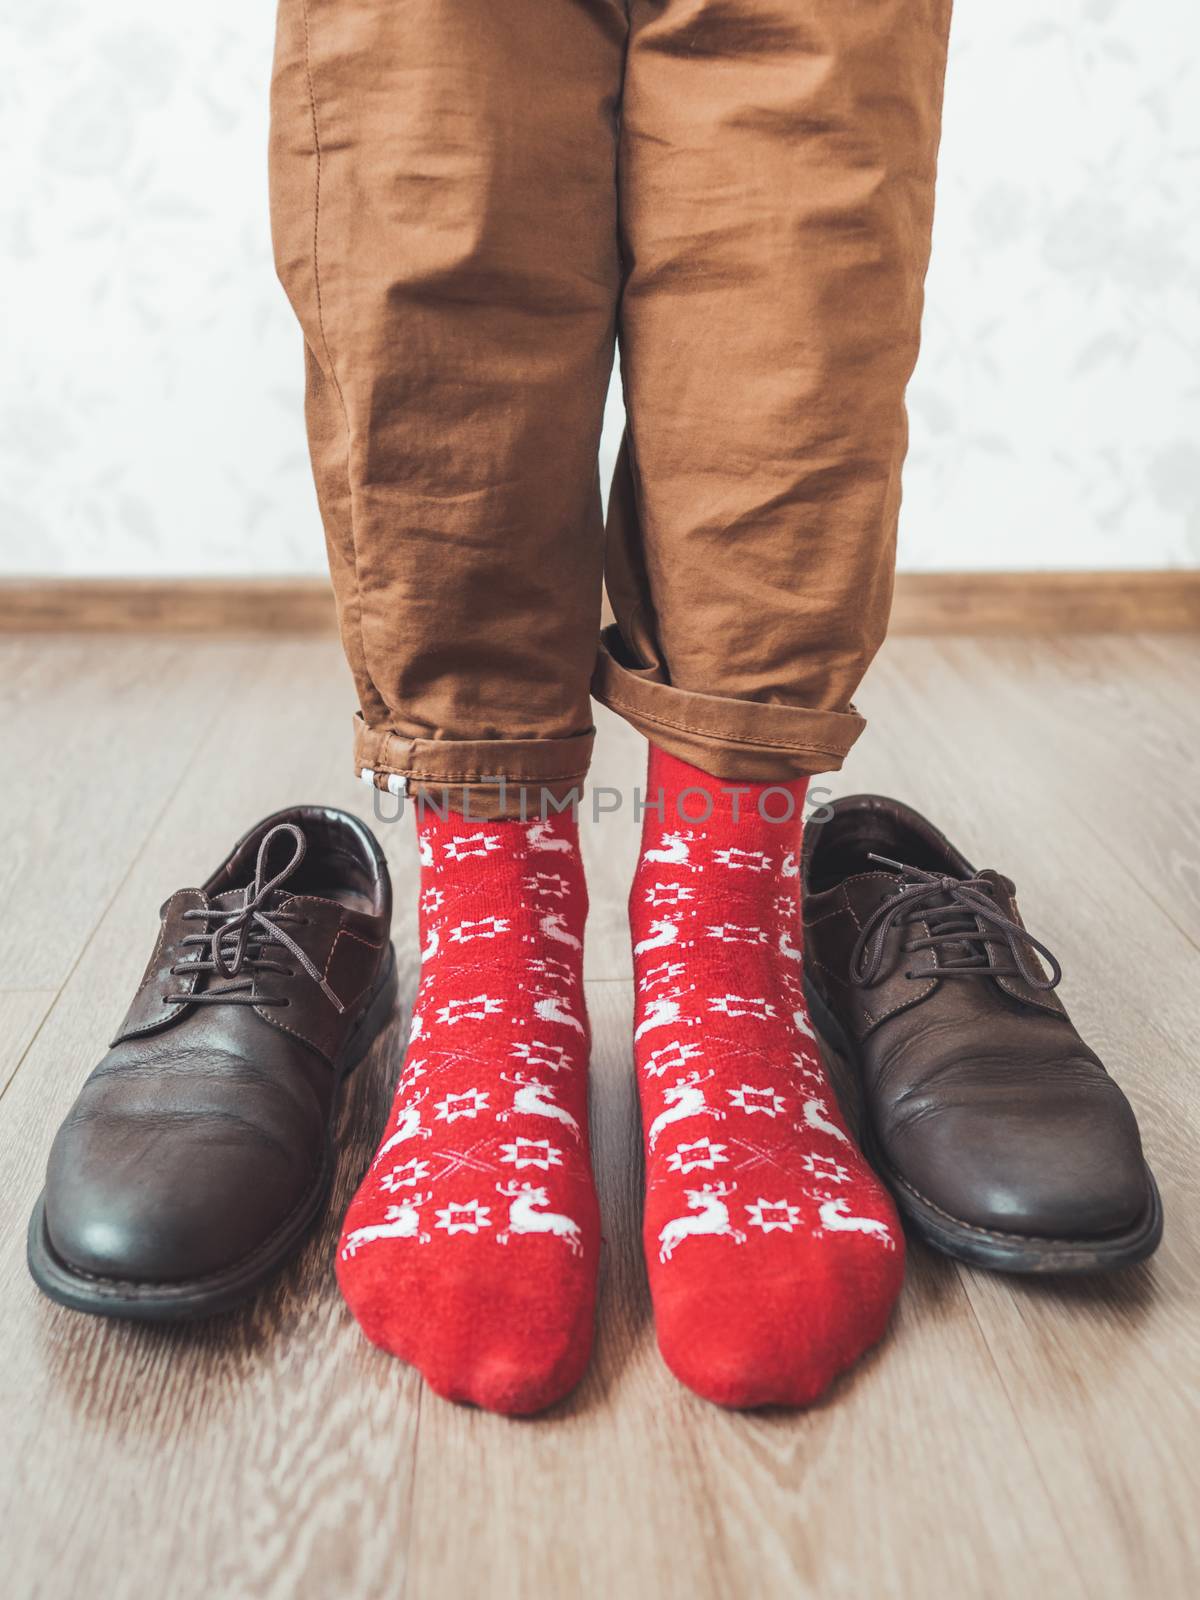 Young man in chinos trousers and bright red socks with reindeers on them is ready to wear sude shoes. Scandinavian pattern. Winter holiday spirit. Casual outfit for New Year and Christmas celebration.